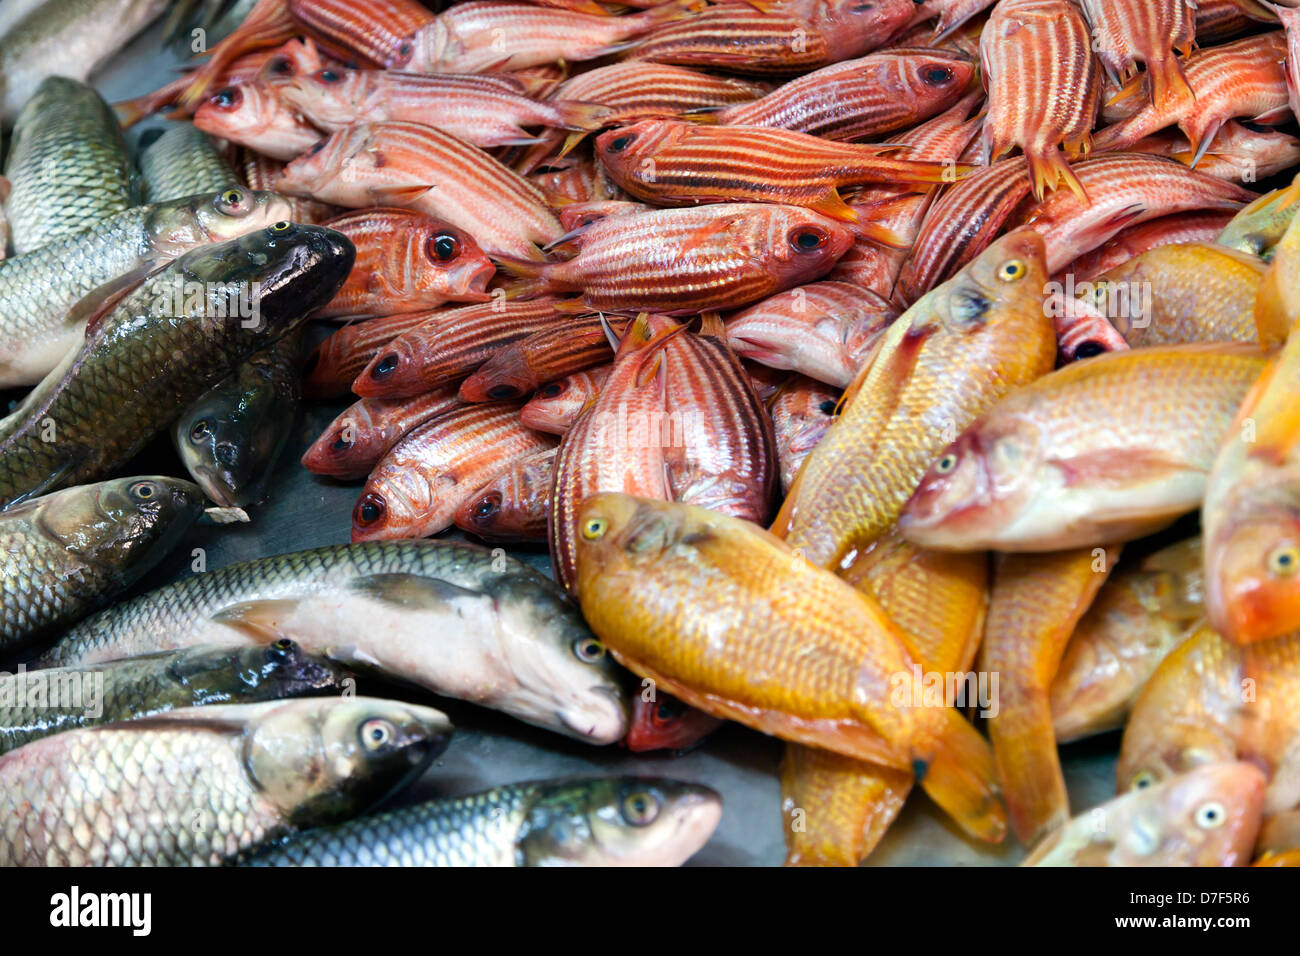 Fresh colorful fish displayed for sale in a market. Stock Photo